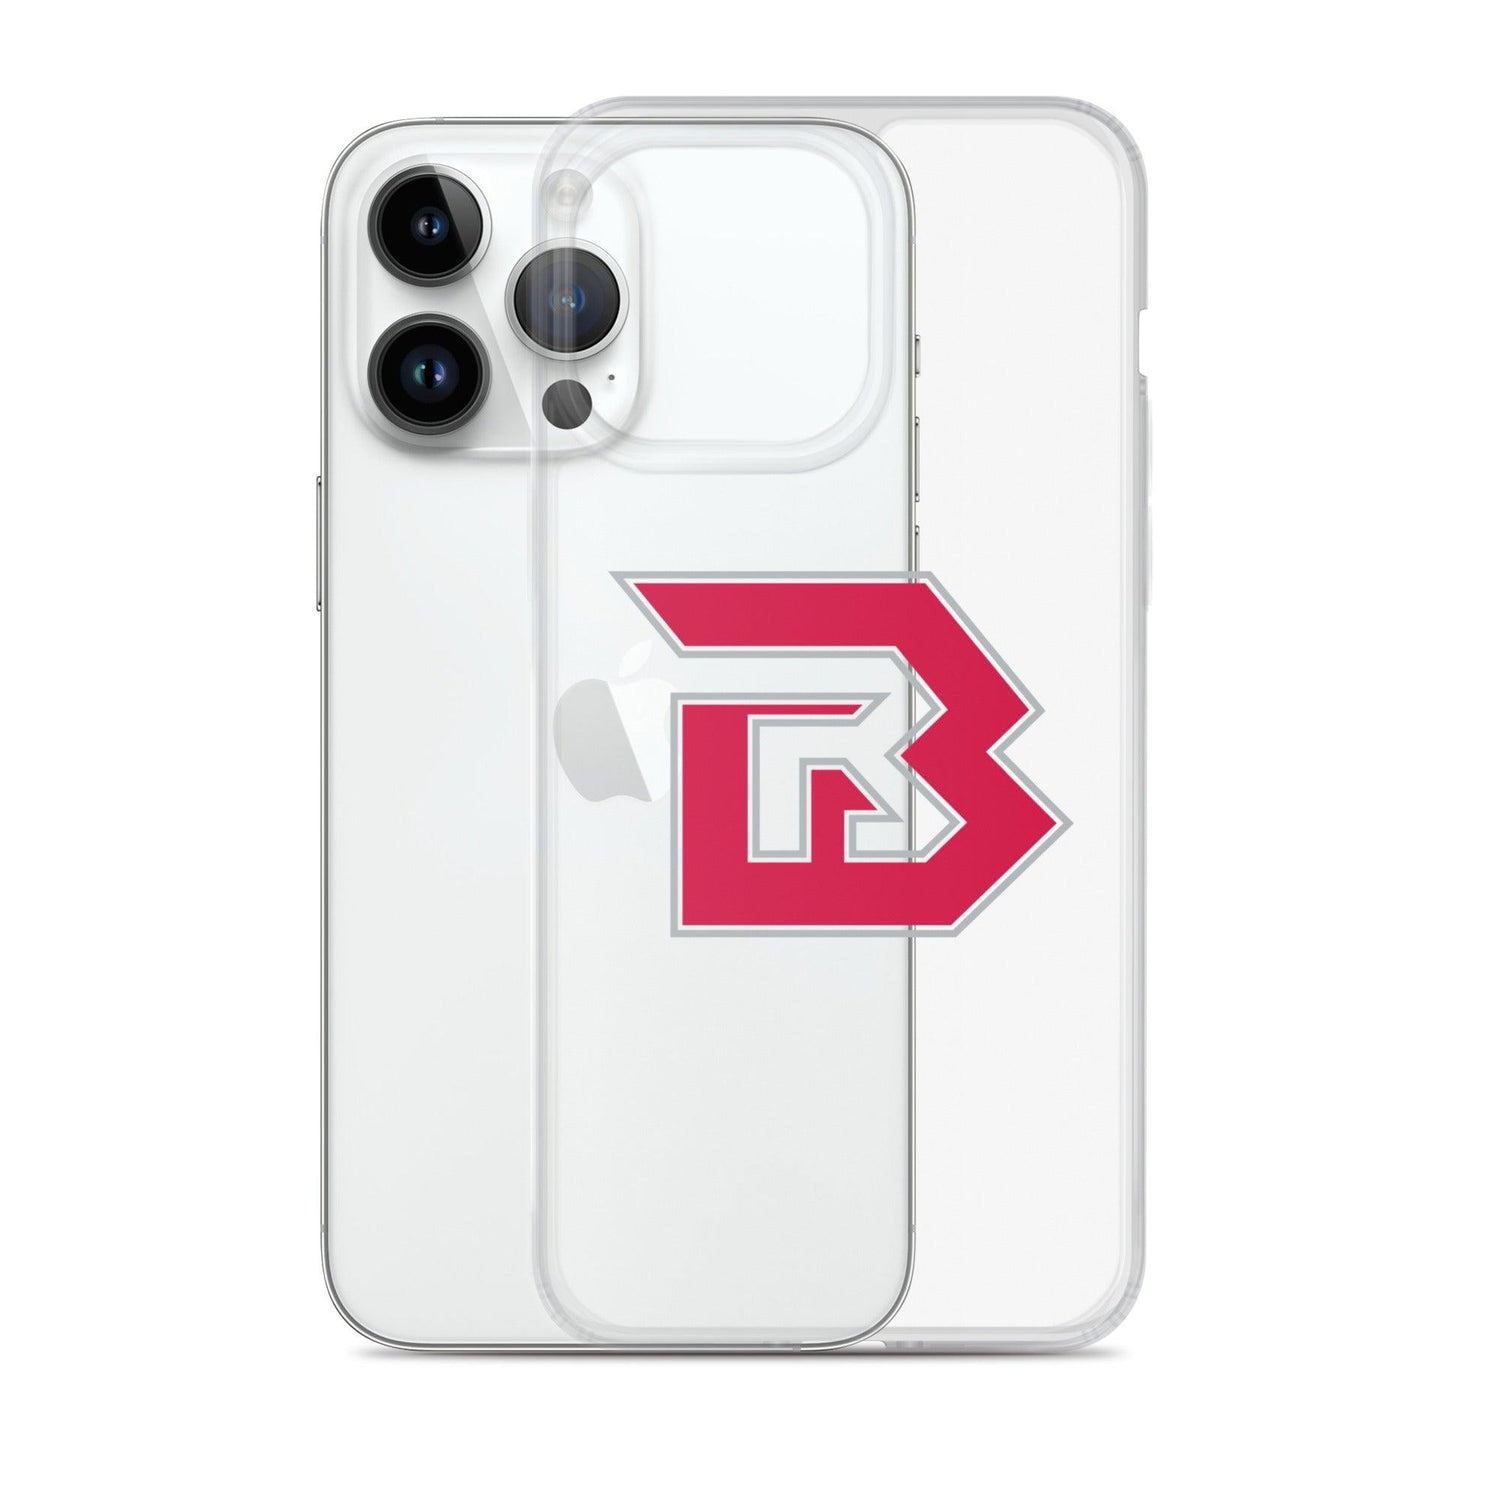 Bryson Rodgers "Essential" iPhone Case - Fan Arch